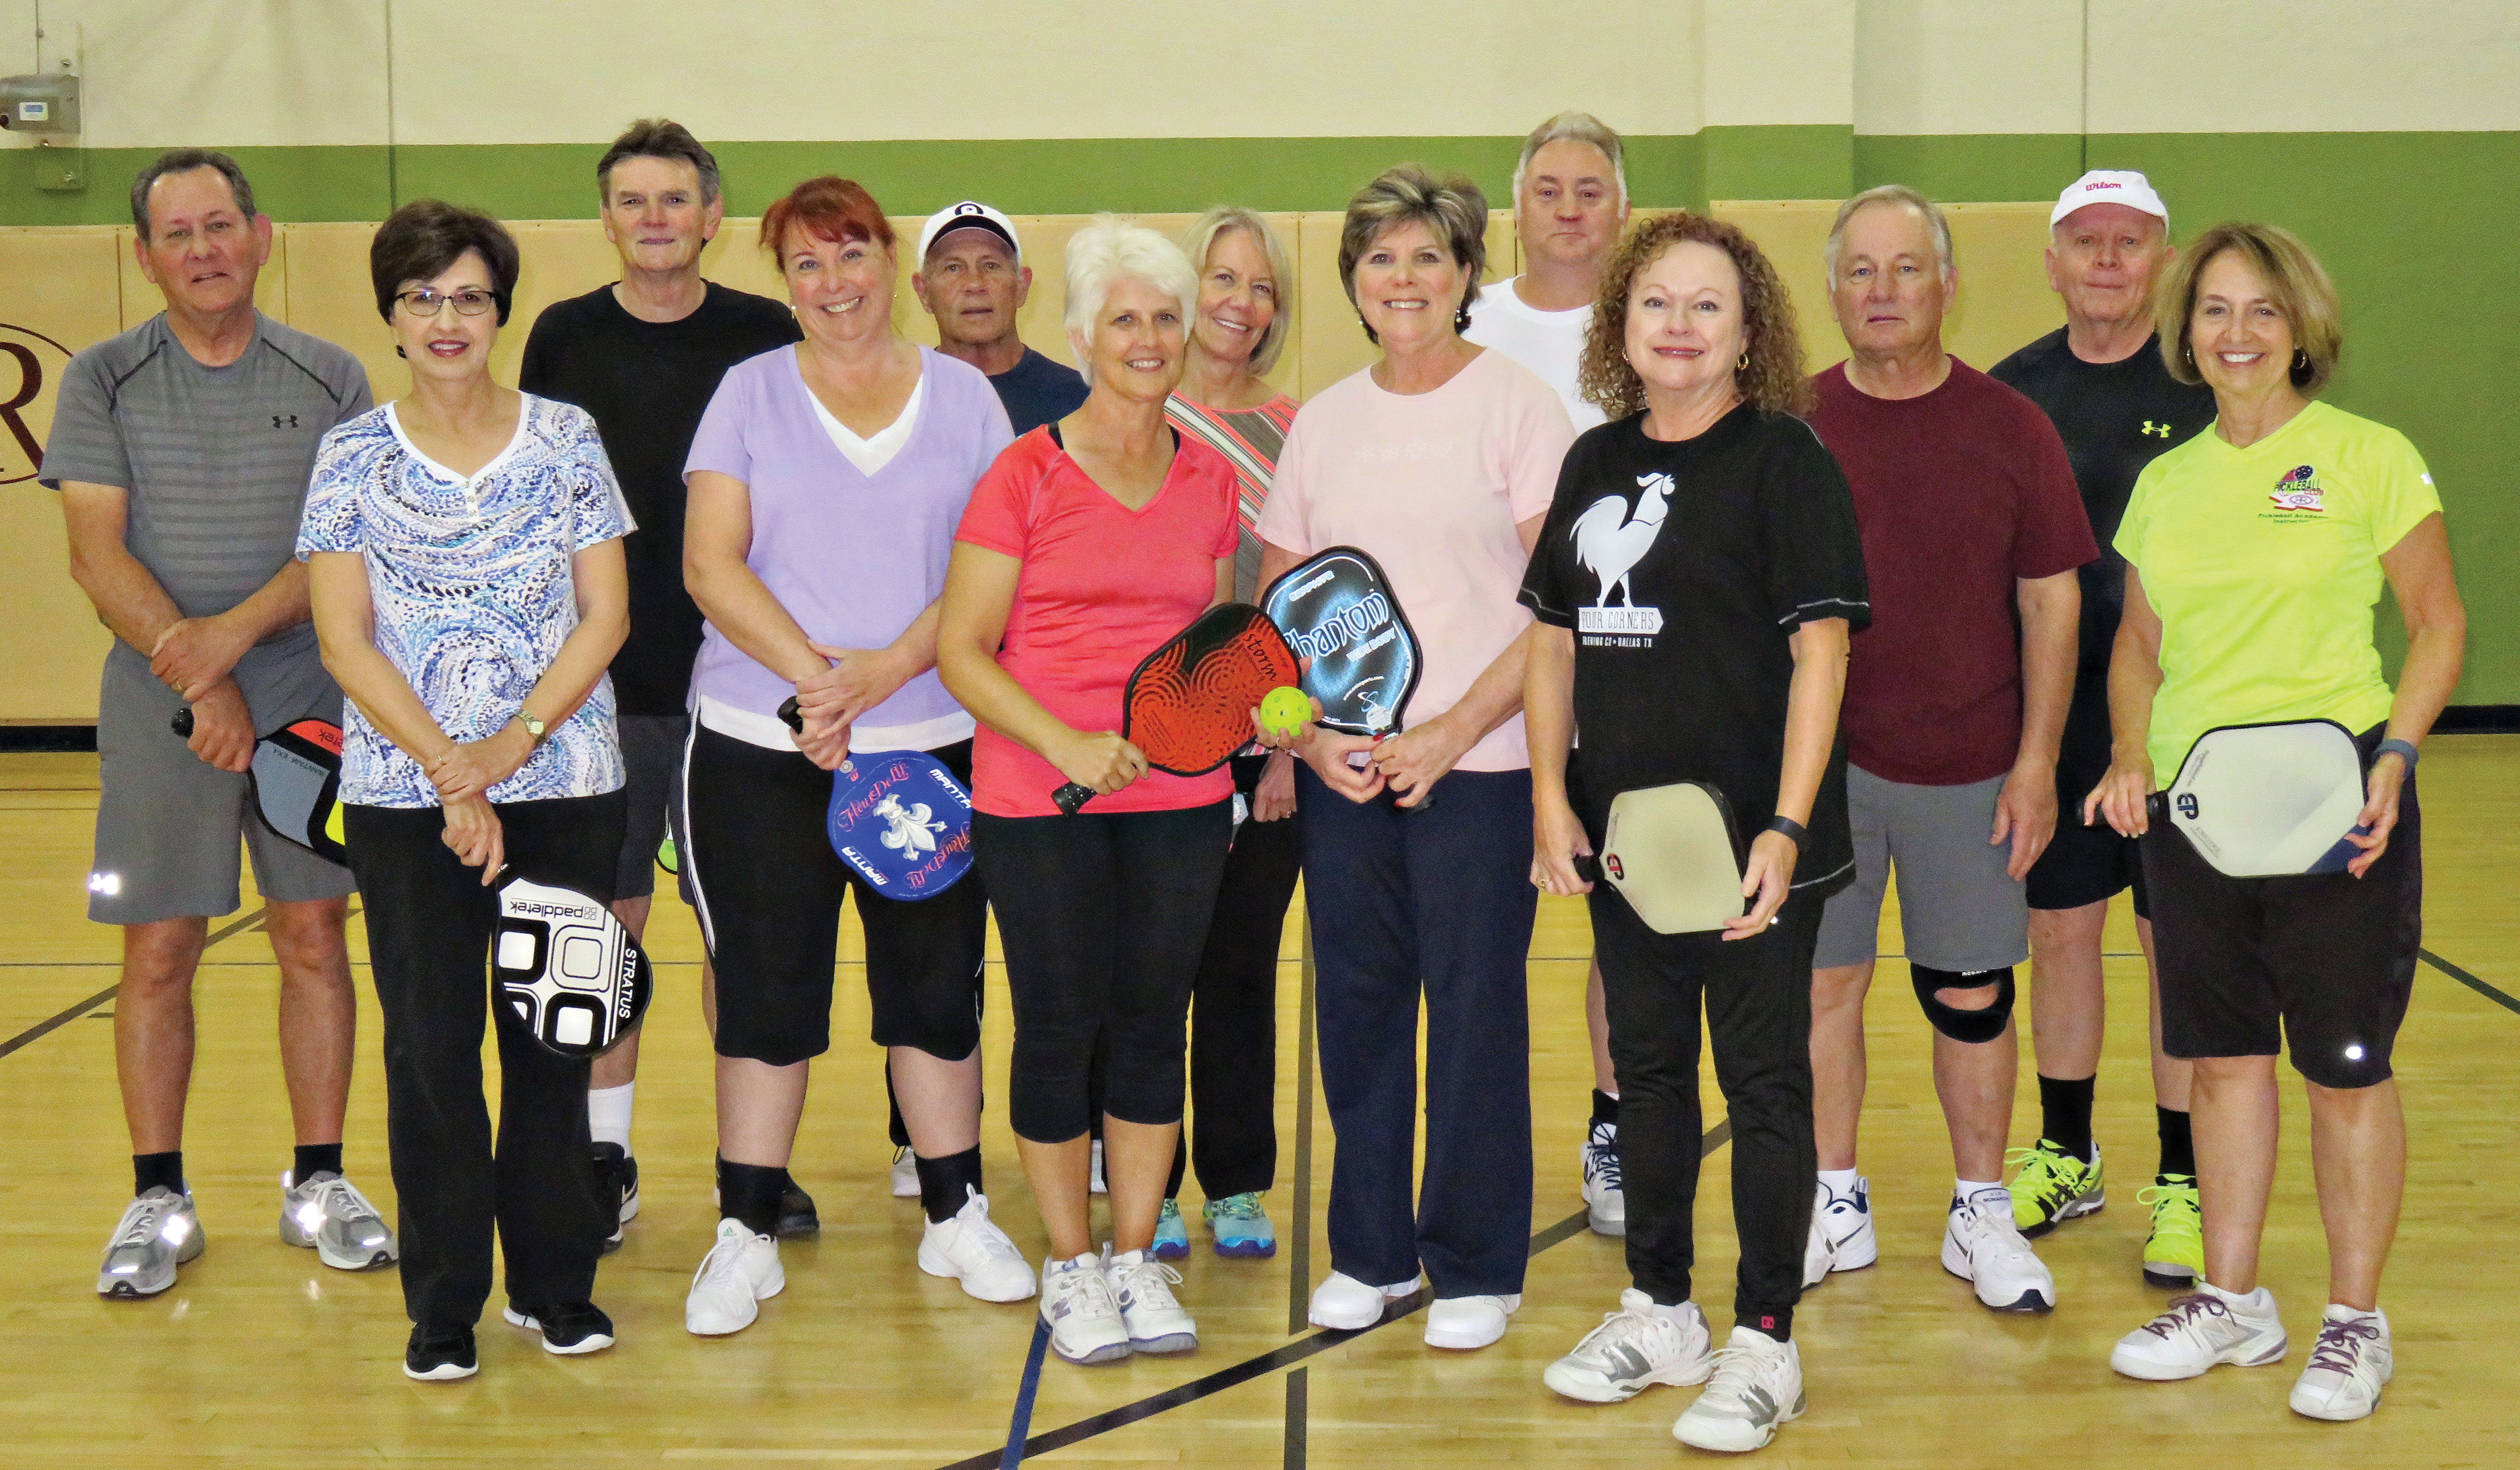 Some of the  graduates of the January Pickleball Academy